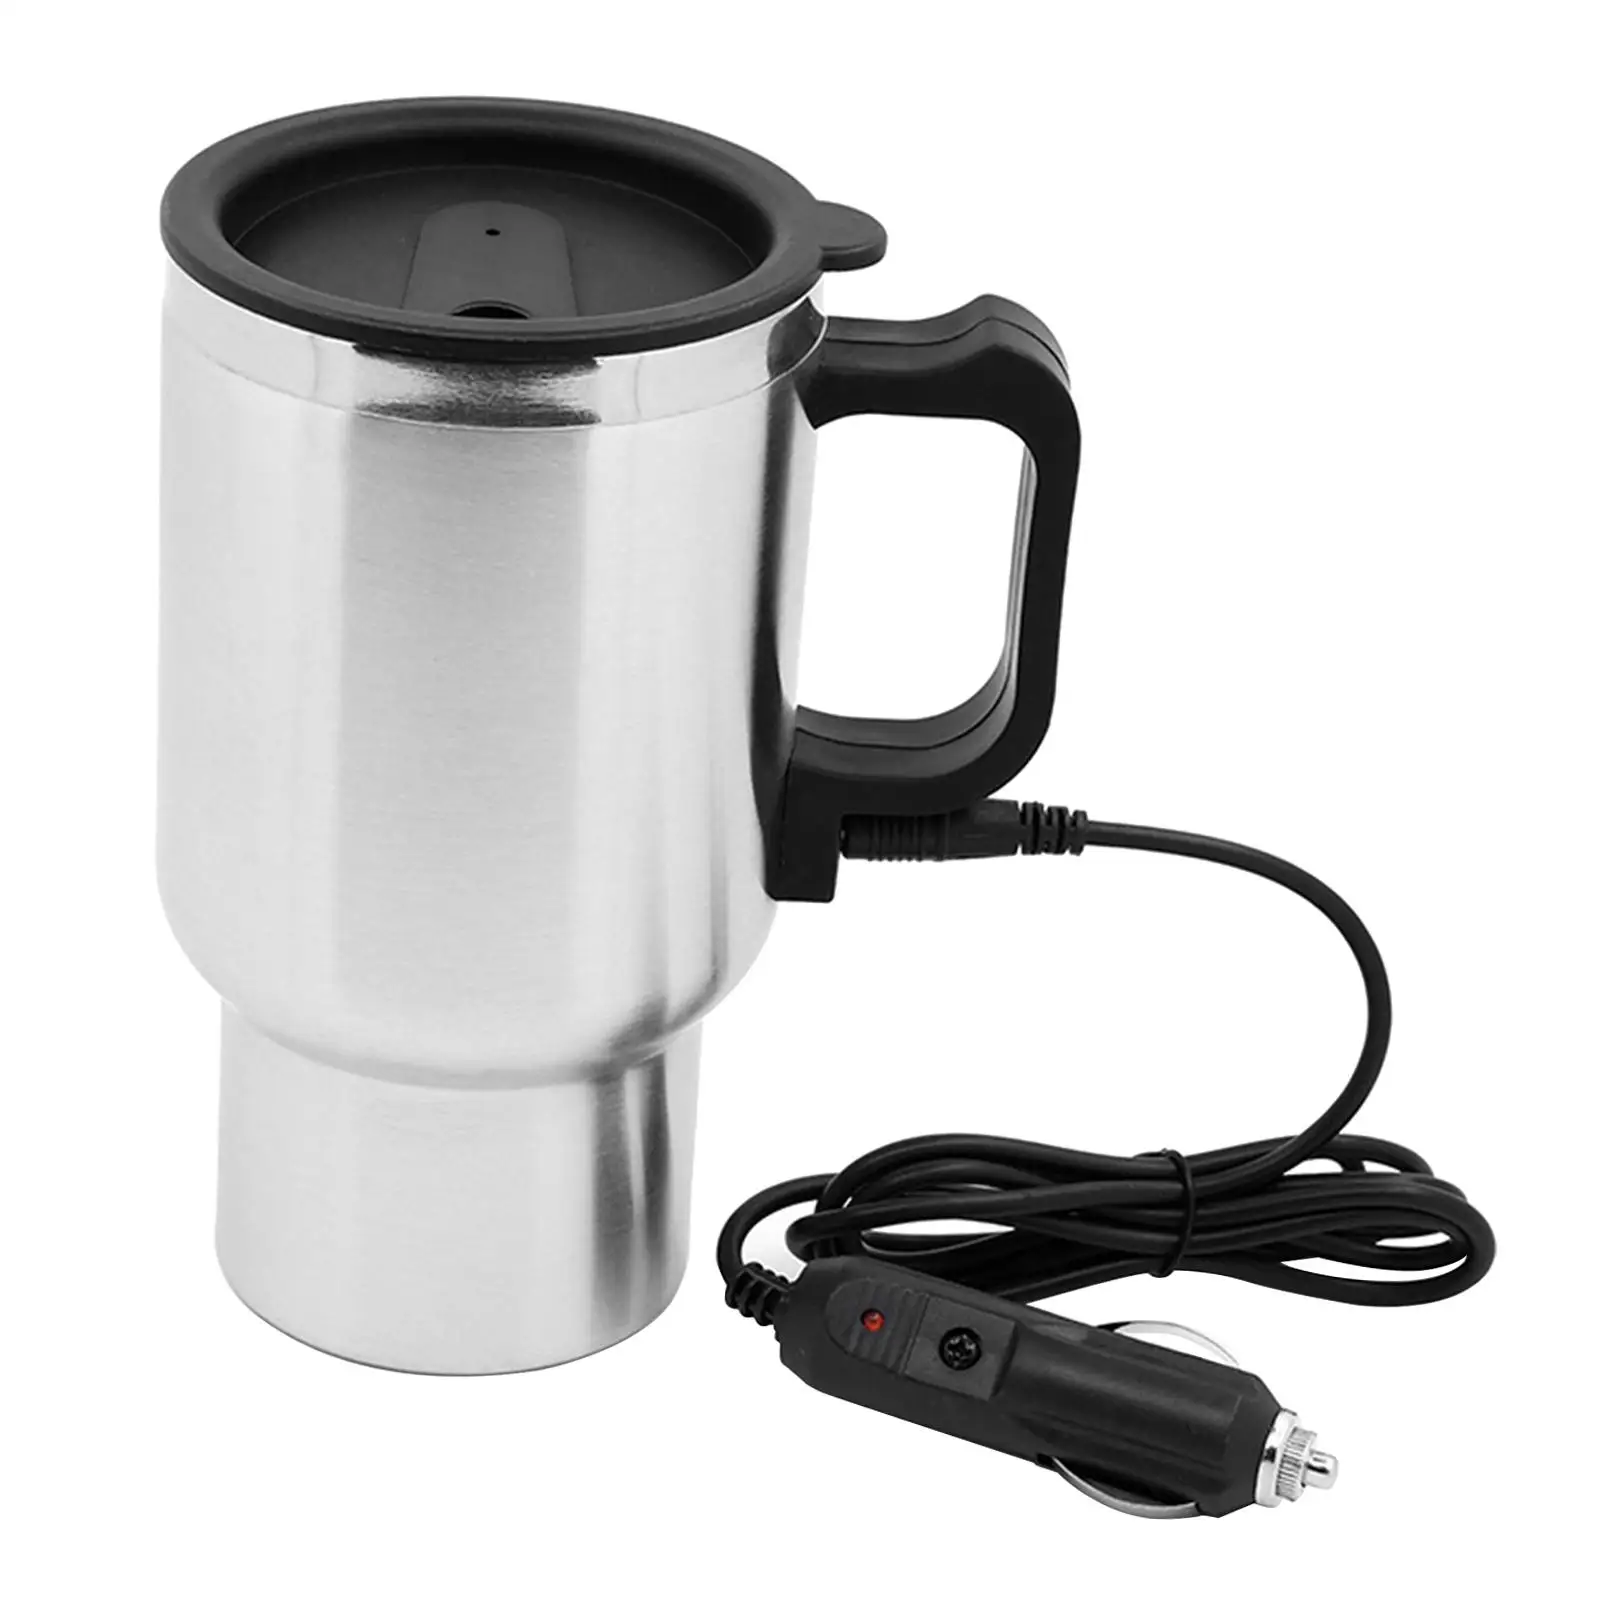 12V Car Heating Cup 500ml Stainless Steel Heated Mug Cup Car Kettle for Tea Heating Water Milk